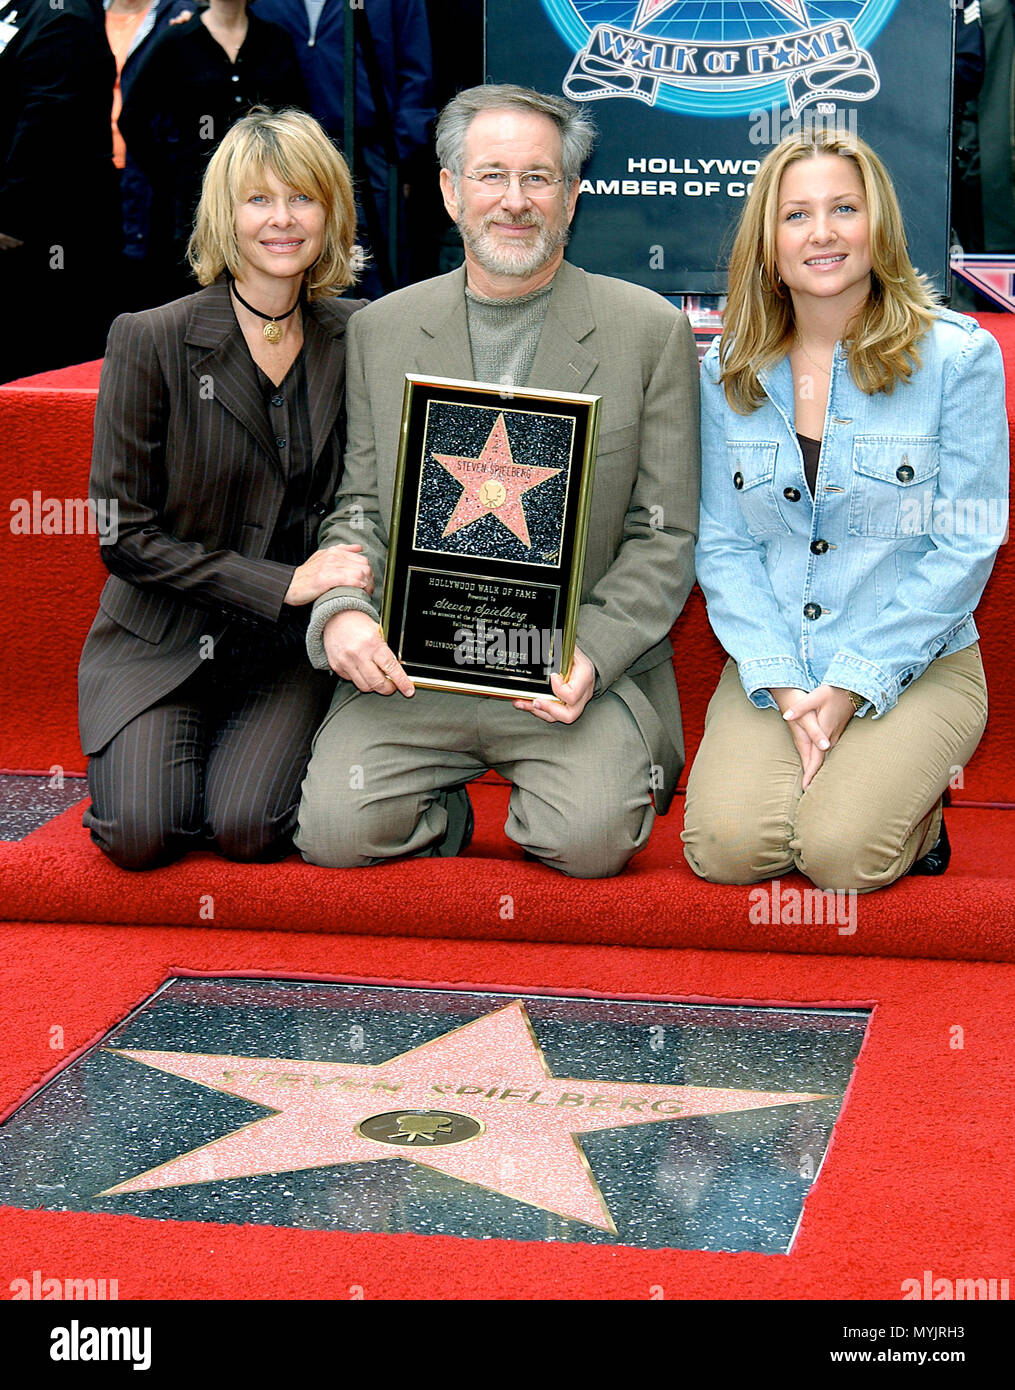 du er Estate medarbejder Steven Spielberg (with wife Kate Capshaw and daughter Jessica Capshaw)  received the 2210th Star on the Hollywood Walk of Fame in Los Angeles.  January 10, 2003. - SpielbergSt CapshawK Jess07.jpgSpielbergSt CapshawK  Jess07